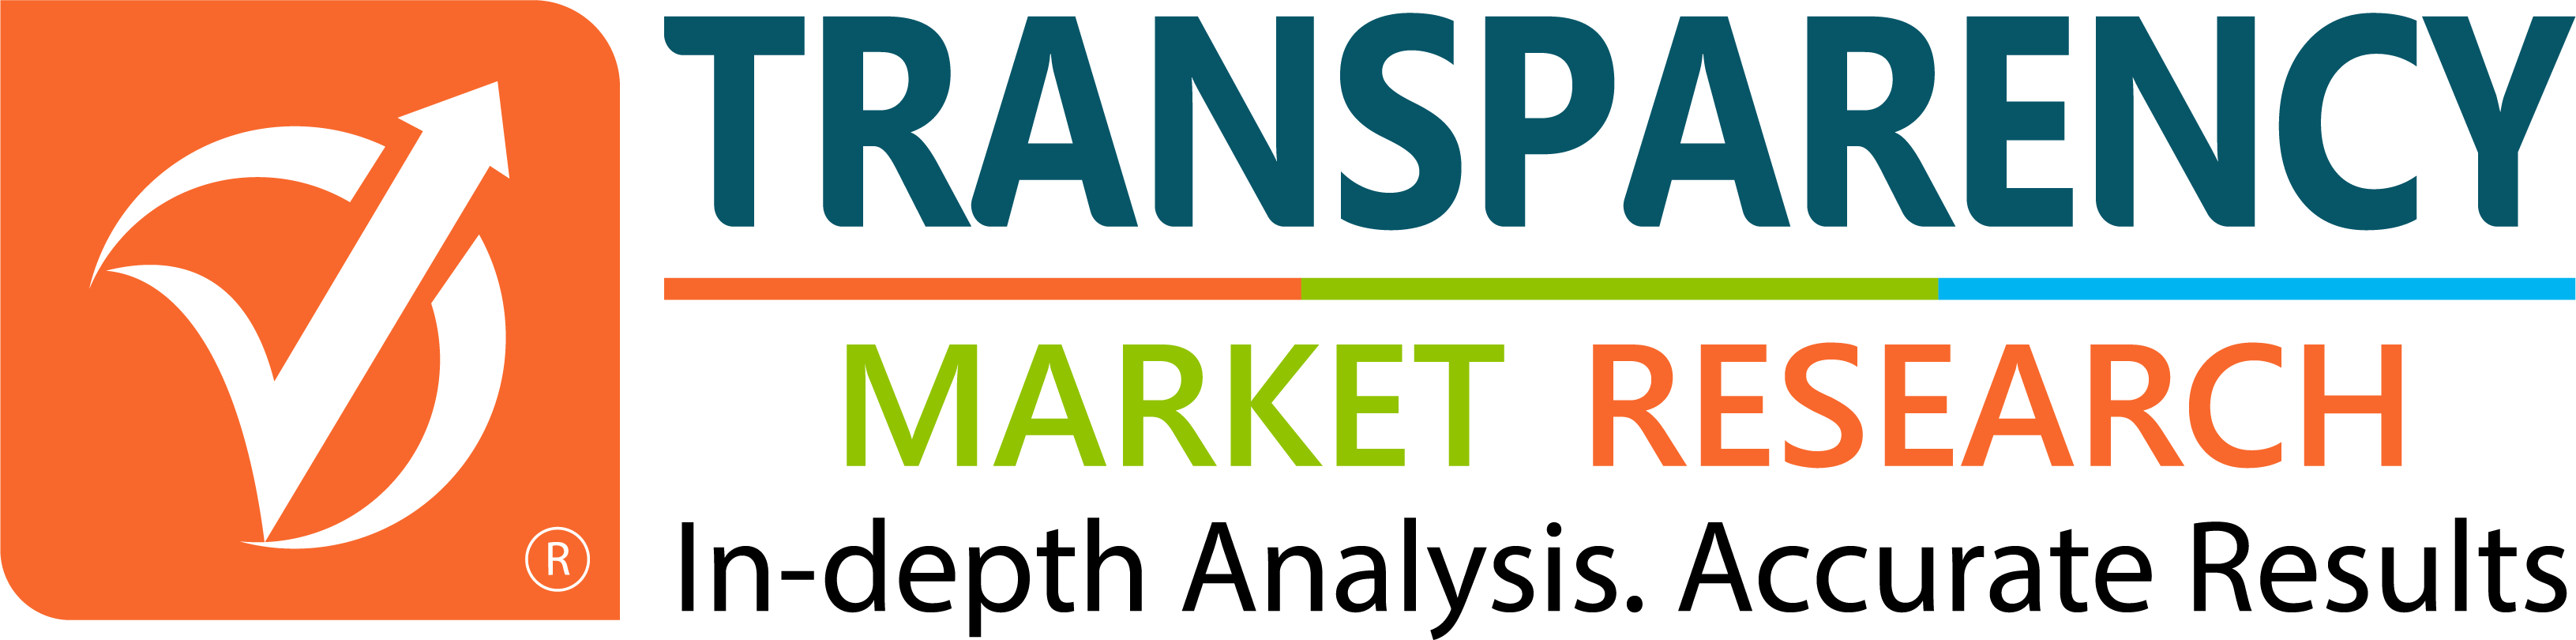 Antihypertensive Drugs Market Worth ~US$ 33.9 Billion at a CAGR of ~2% from 2019 to 2027 | Transparency Market Research